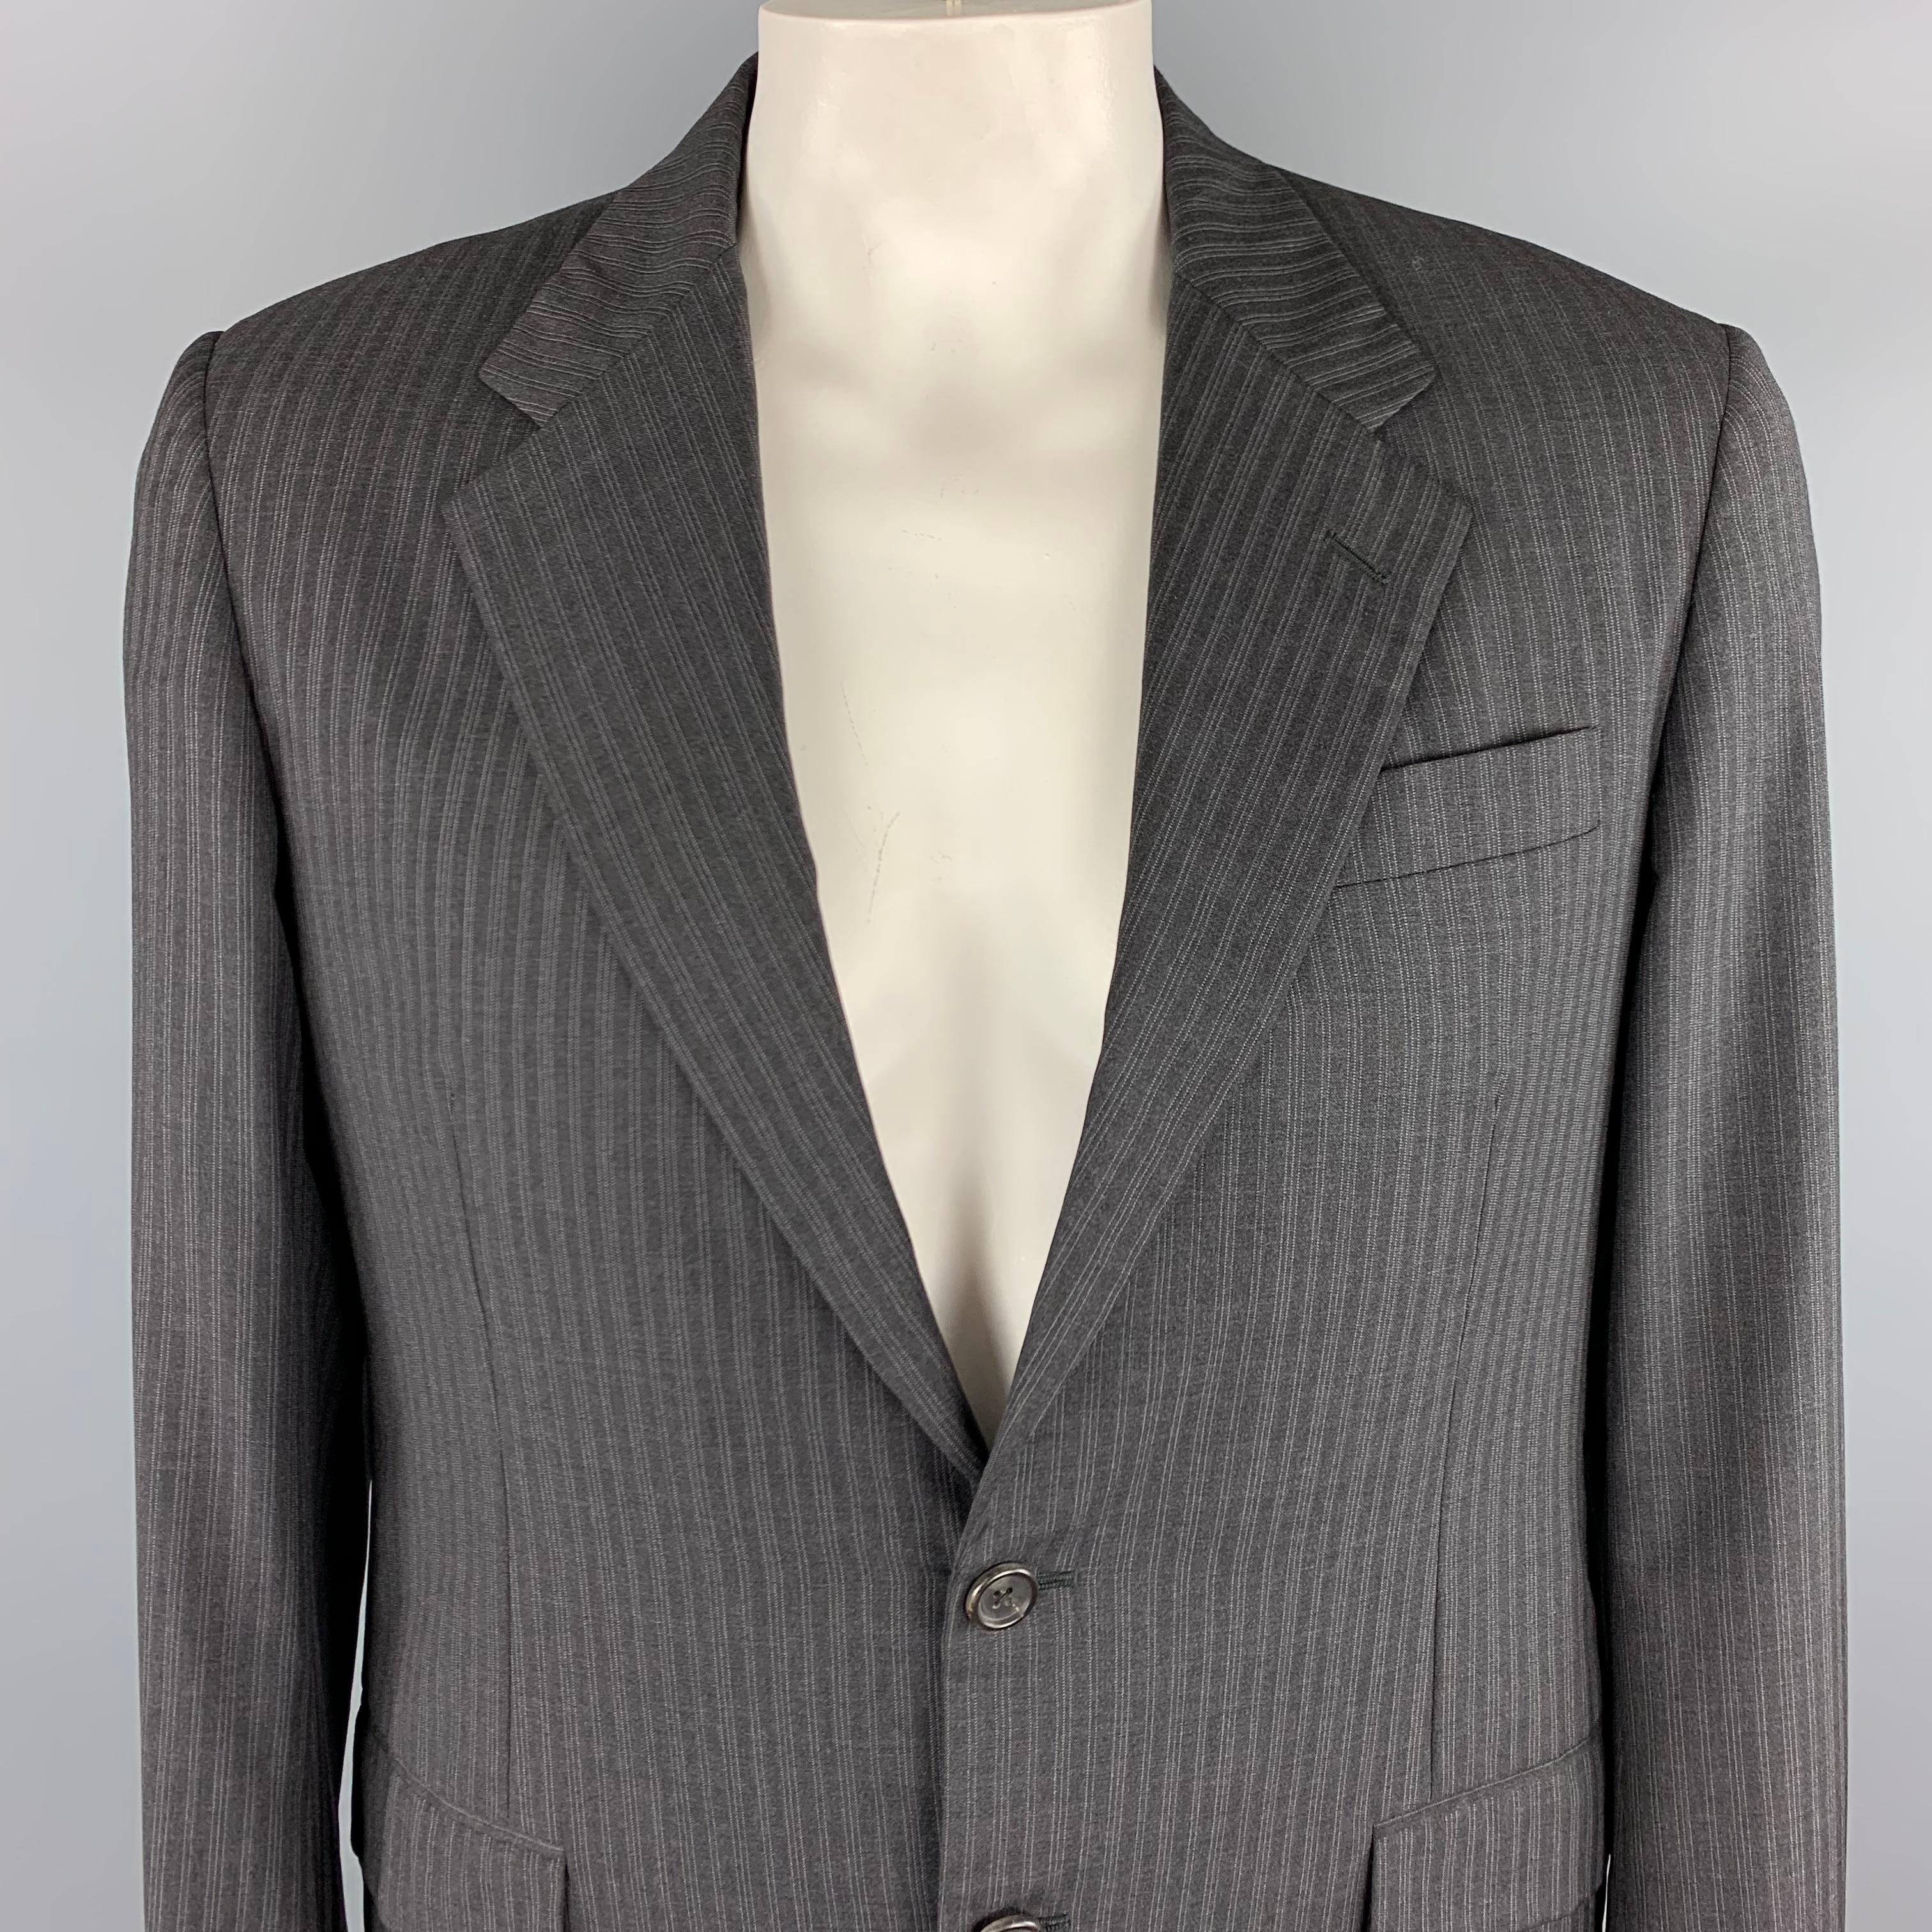 PRADA Sport Coat comes in a charcoal tone in a striped wool material, with a notch lapel, slit and flap pockets, two buttons at closure, single breasted, double vent at back and buttoned cuffs. Made in Italy.
 
Excellent Pre-Owned Condition.
Marked: